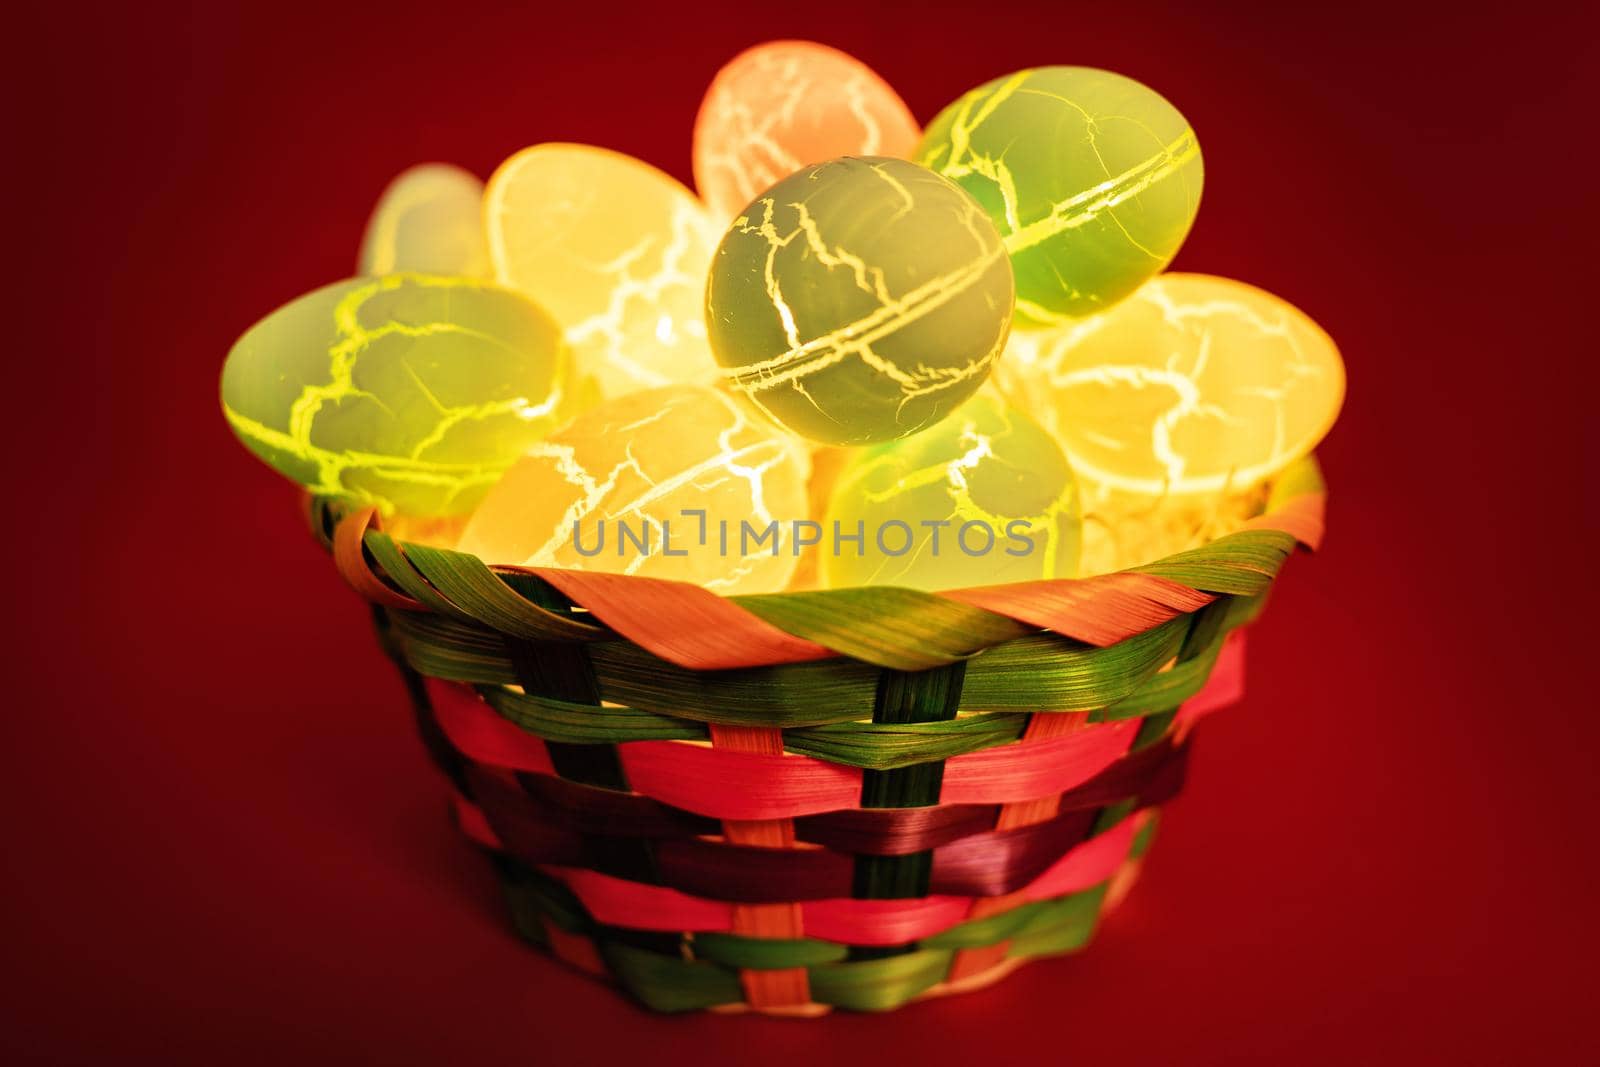 Close up of lights in the sahepe od Easter eggs in a colorful basket, on red background. Easter decoration concept. Fun and colorful Easter celebration concept.